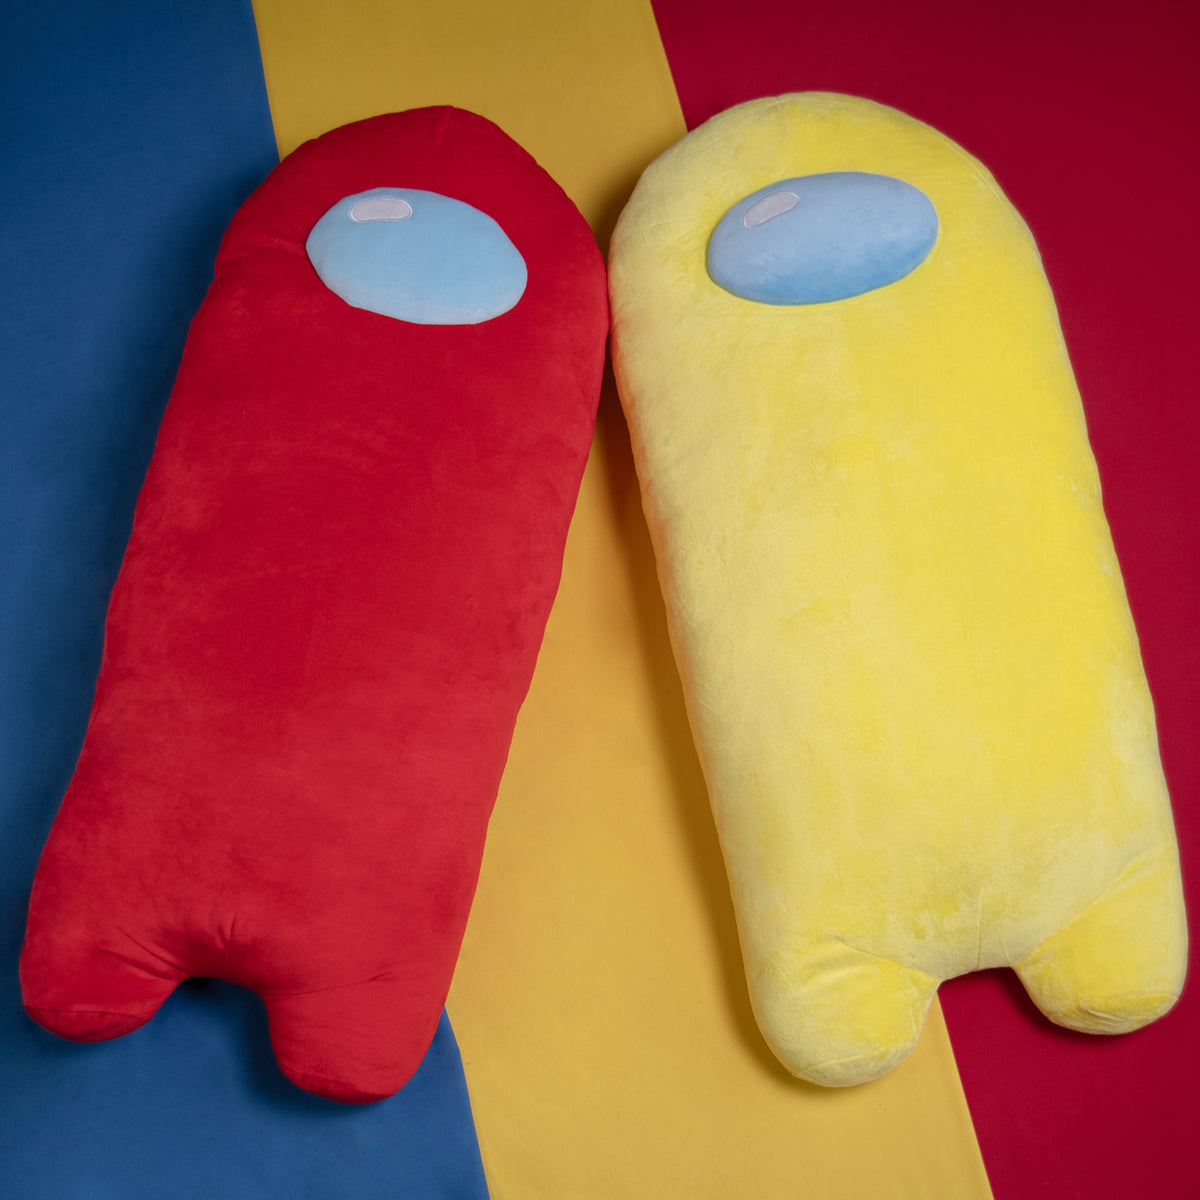 A lifestyle photograph of the red and yellow longbean plushies laying side by side against a blue, yellow, and red background.